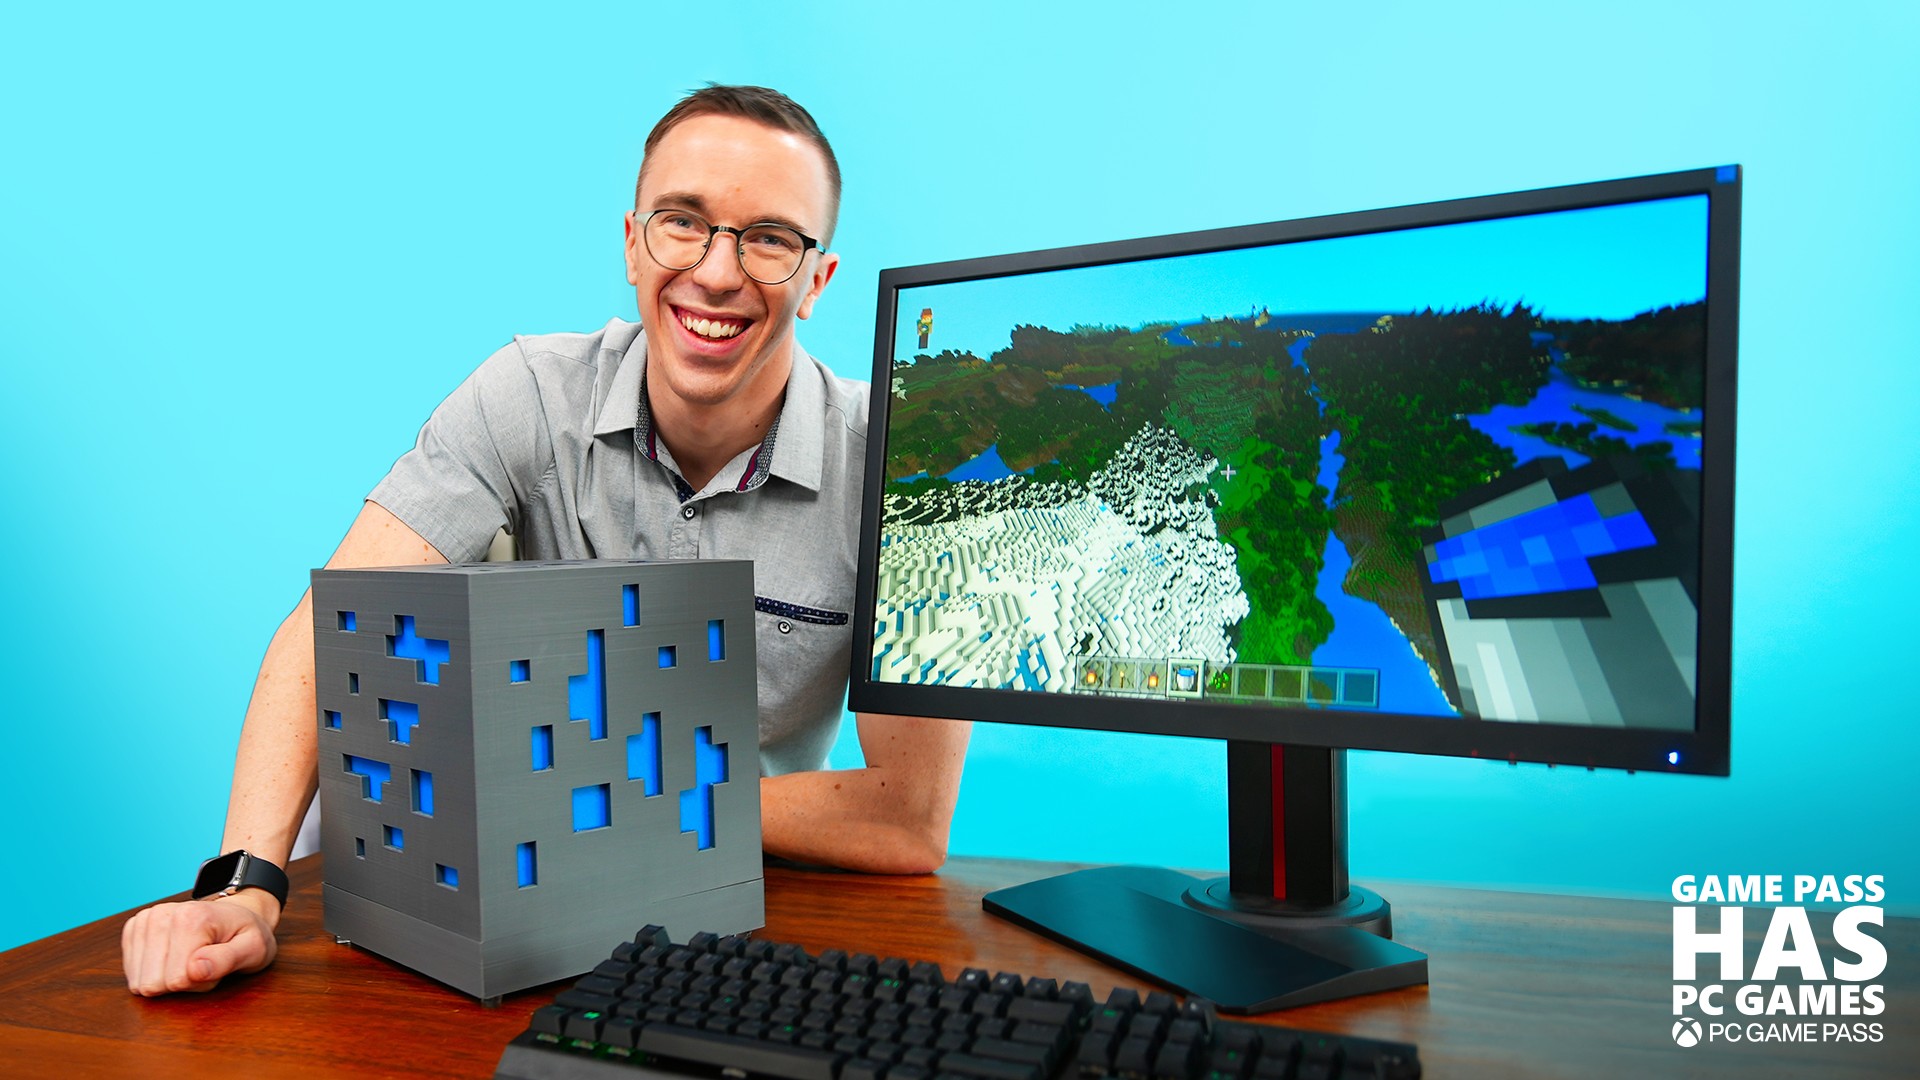 Game Pass includes PC games - PC Builder series: Minecraft